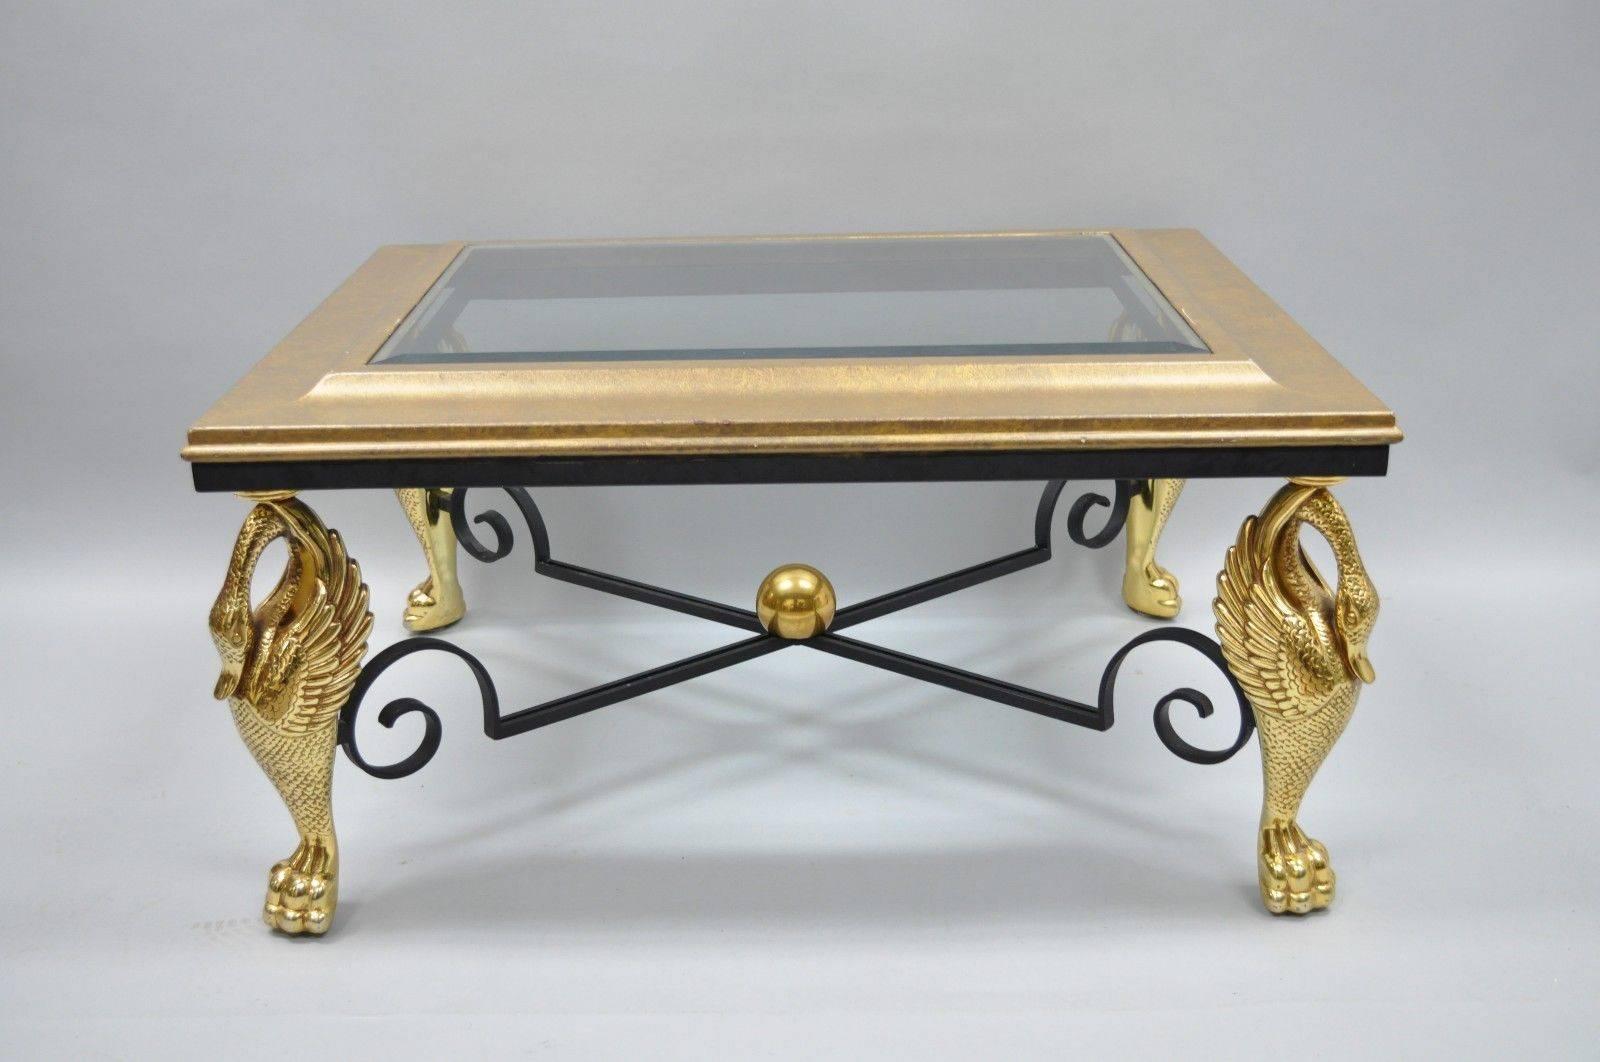 Regency Style Swan Base Rectangular Coffee Table Gold Metal Iron and Glass Top For Sale 2